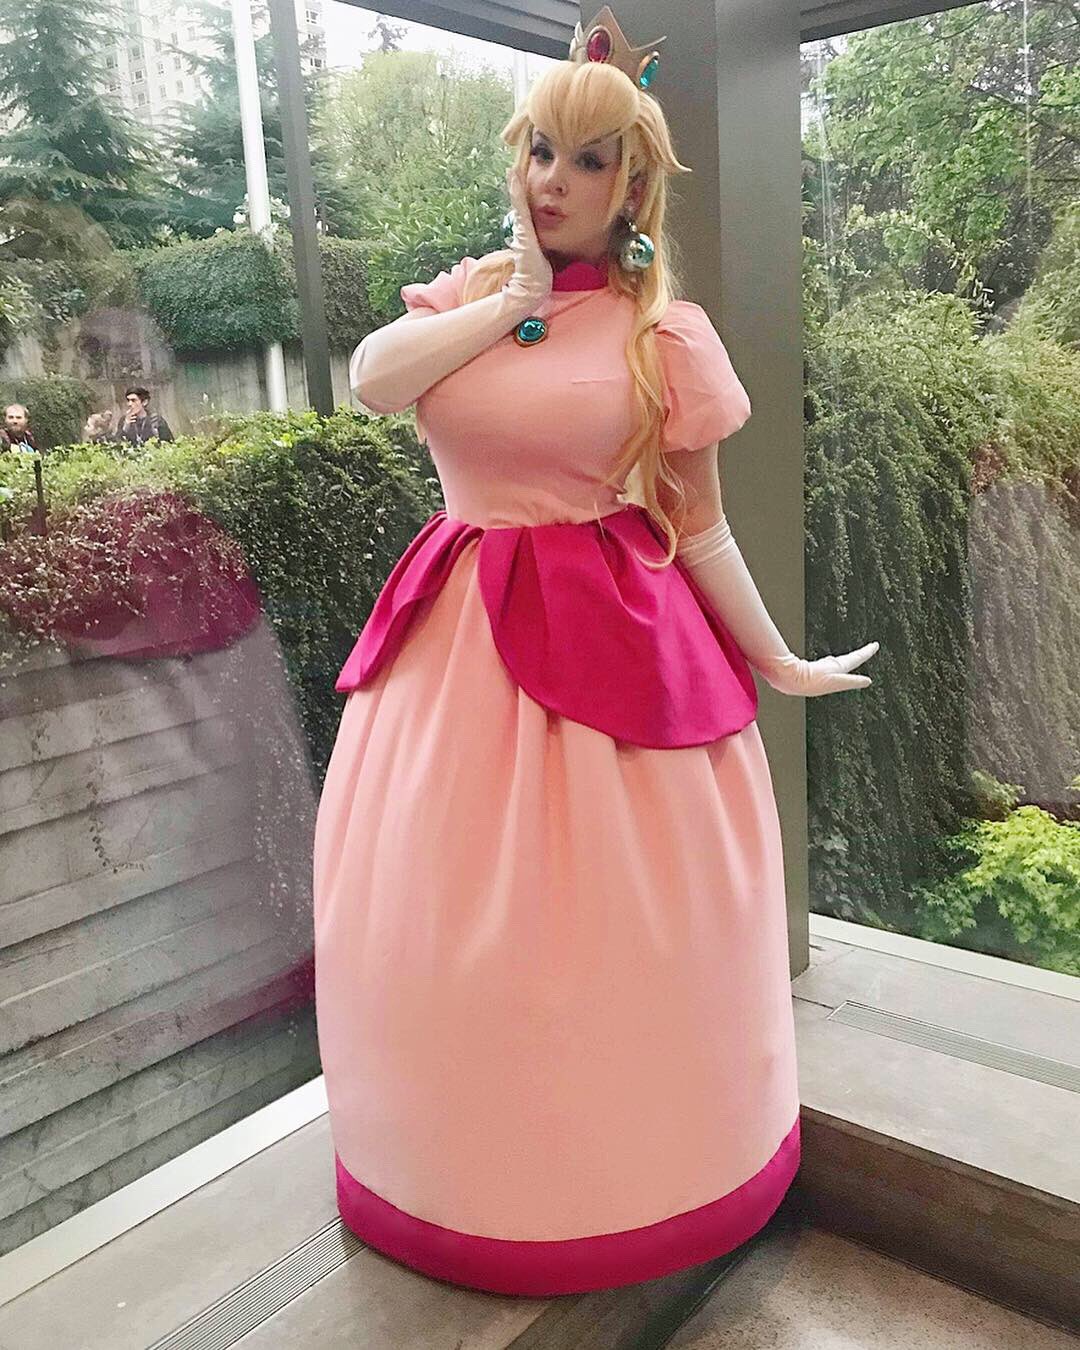 👑 Pookie 🐻 Bear 👑 on Twitter: "🎉Achievement unlocked: Dream cosplay!! 🎉 I've wanted to cosplay princess Peach in her original dress and I finally made it happen and got to